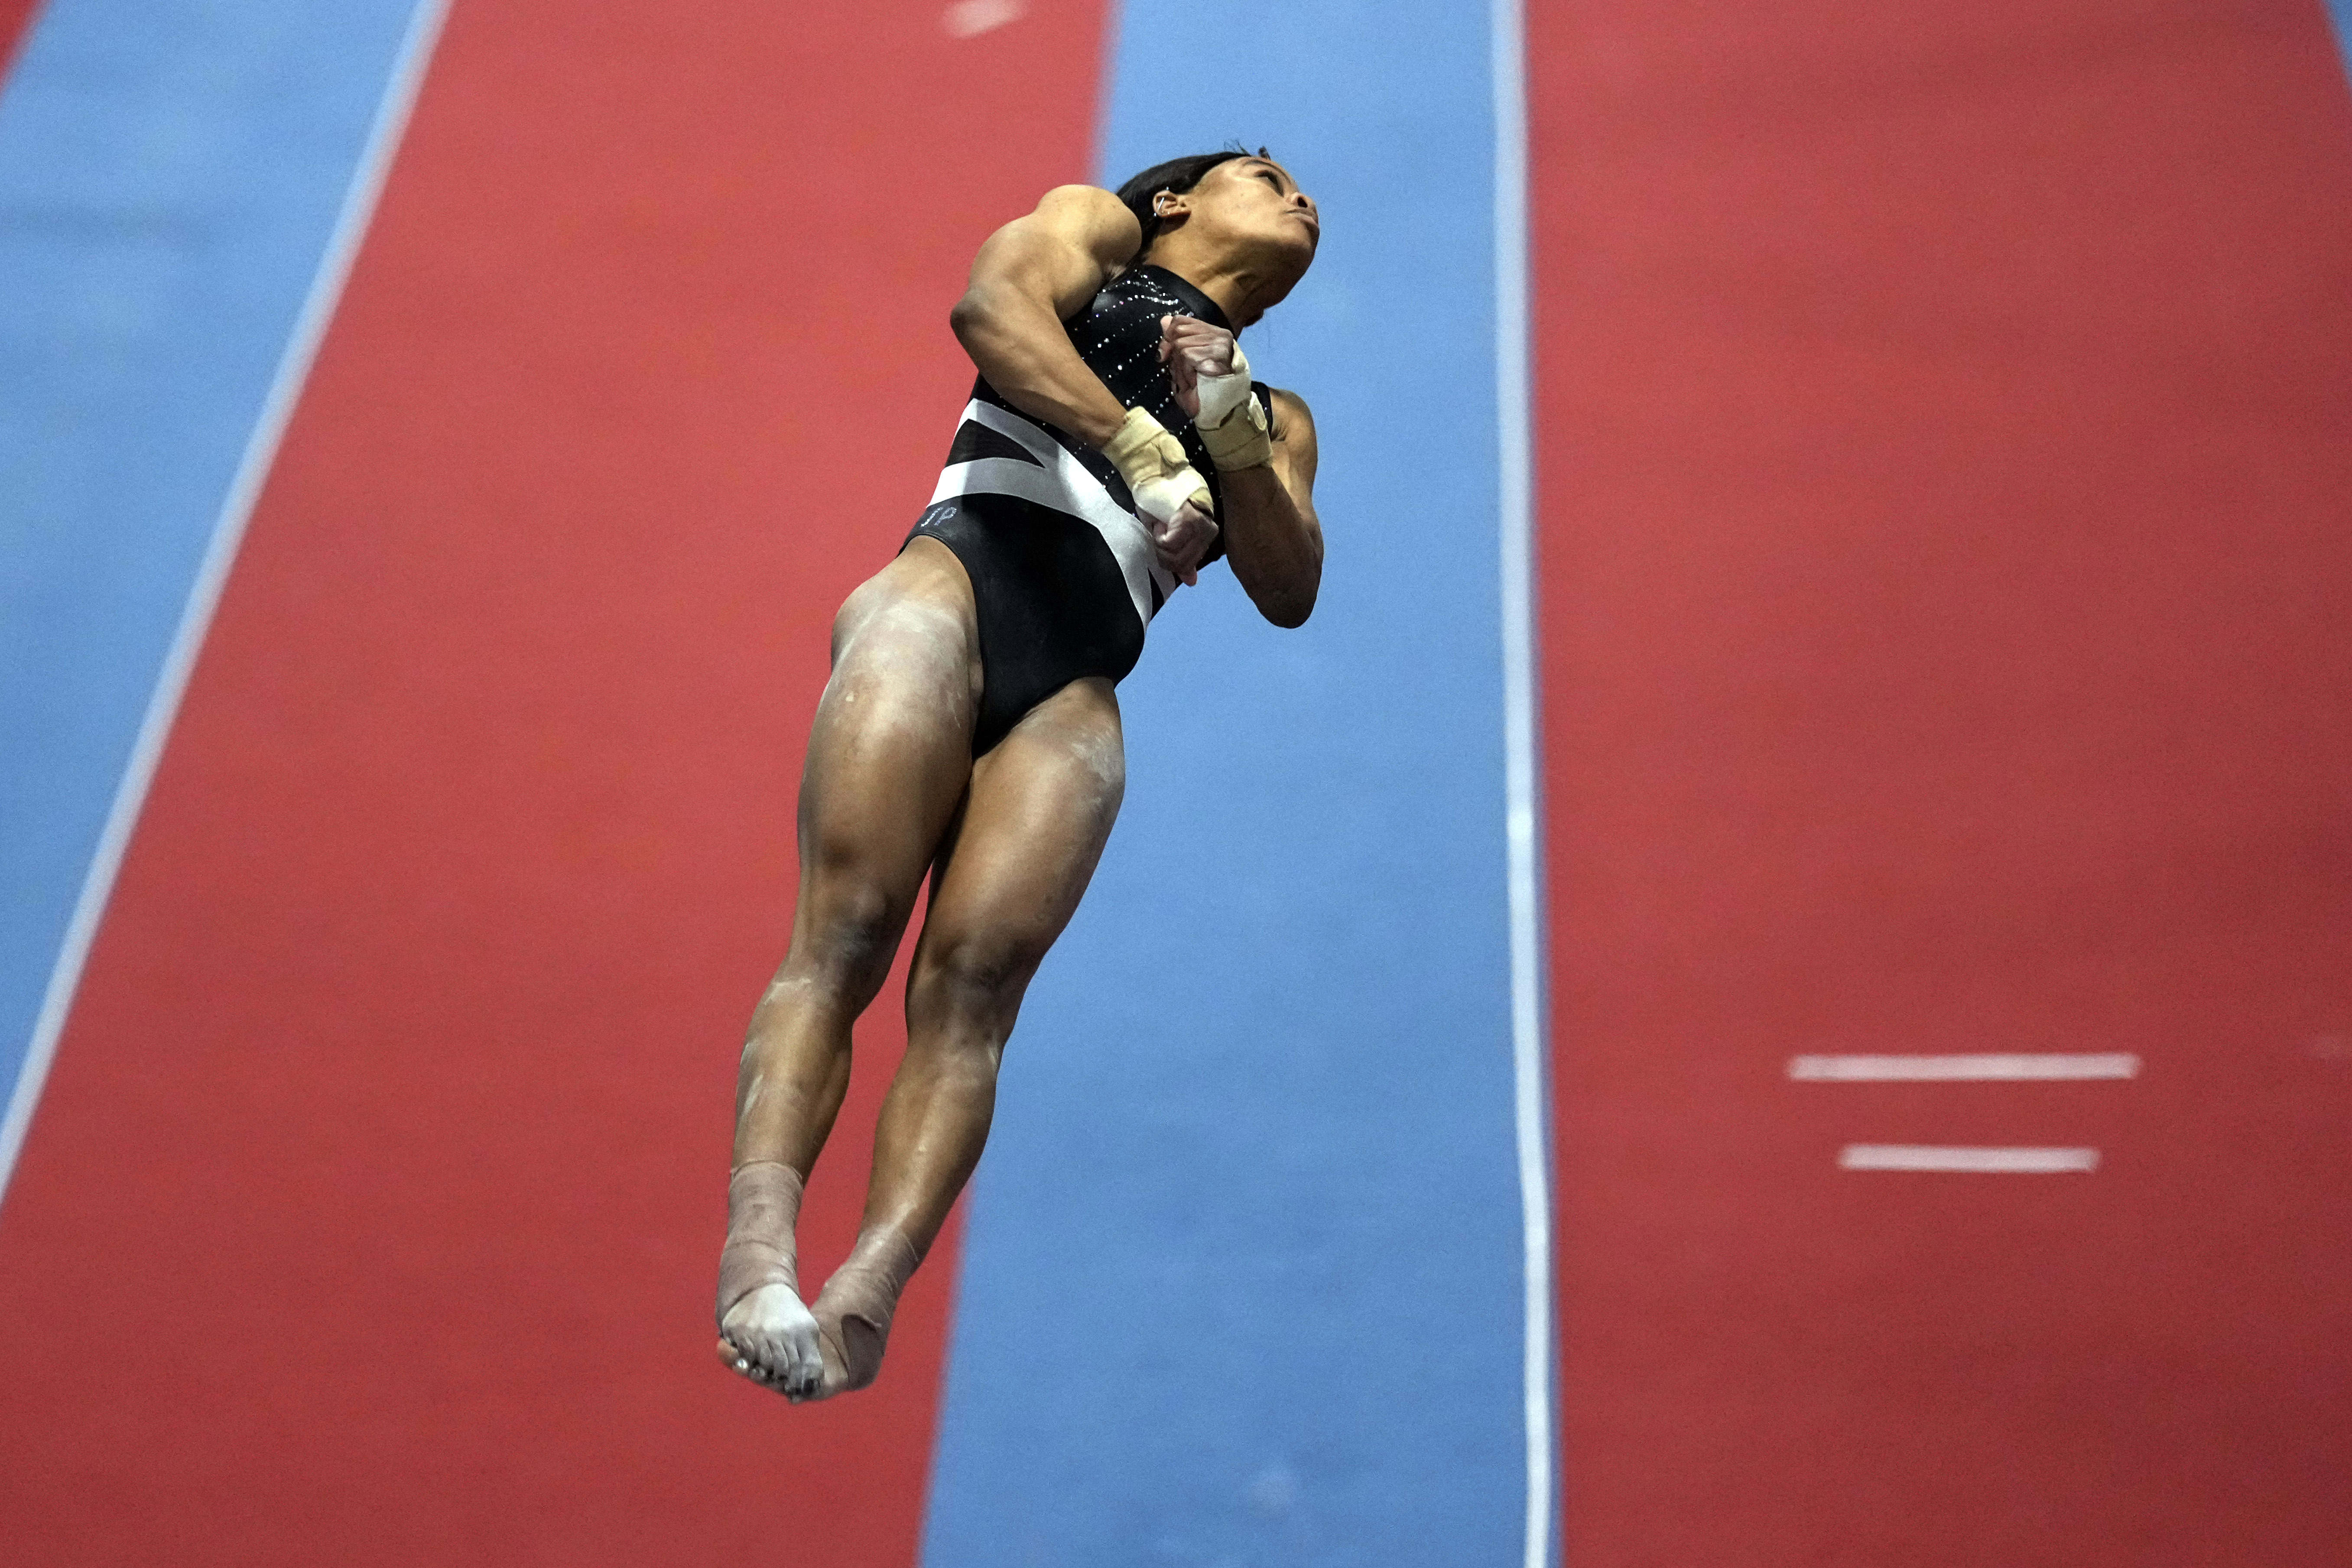 Gabby Douglas returns to gymnastics after 8 years and qualifies for US
Championships